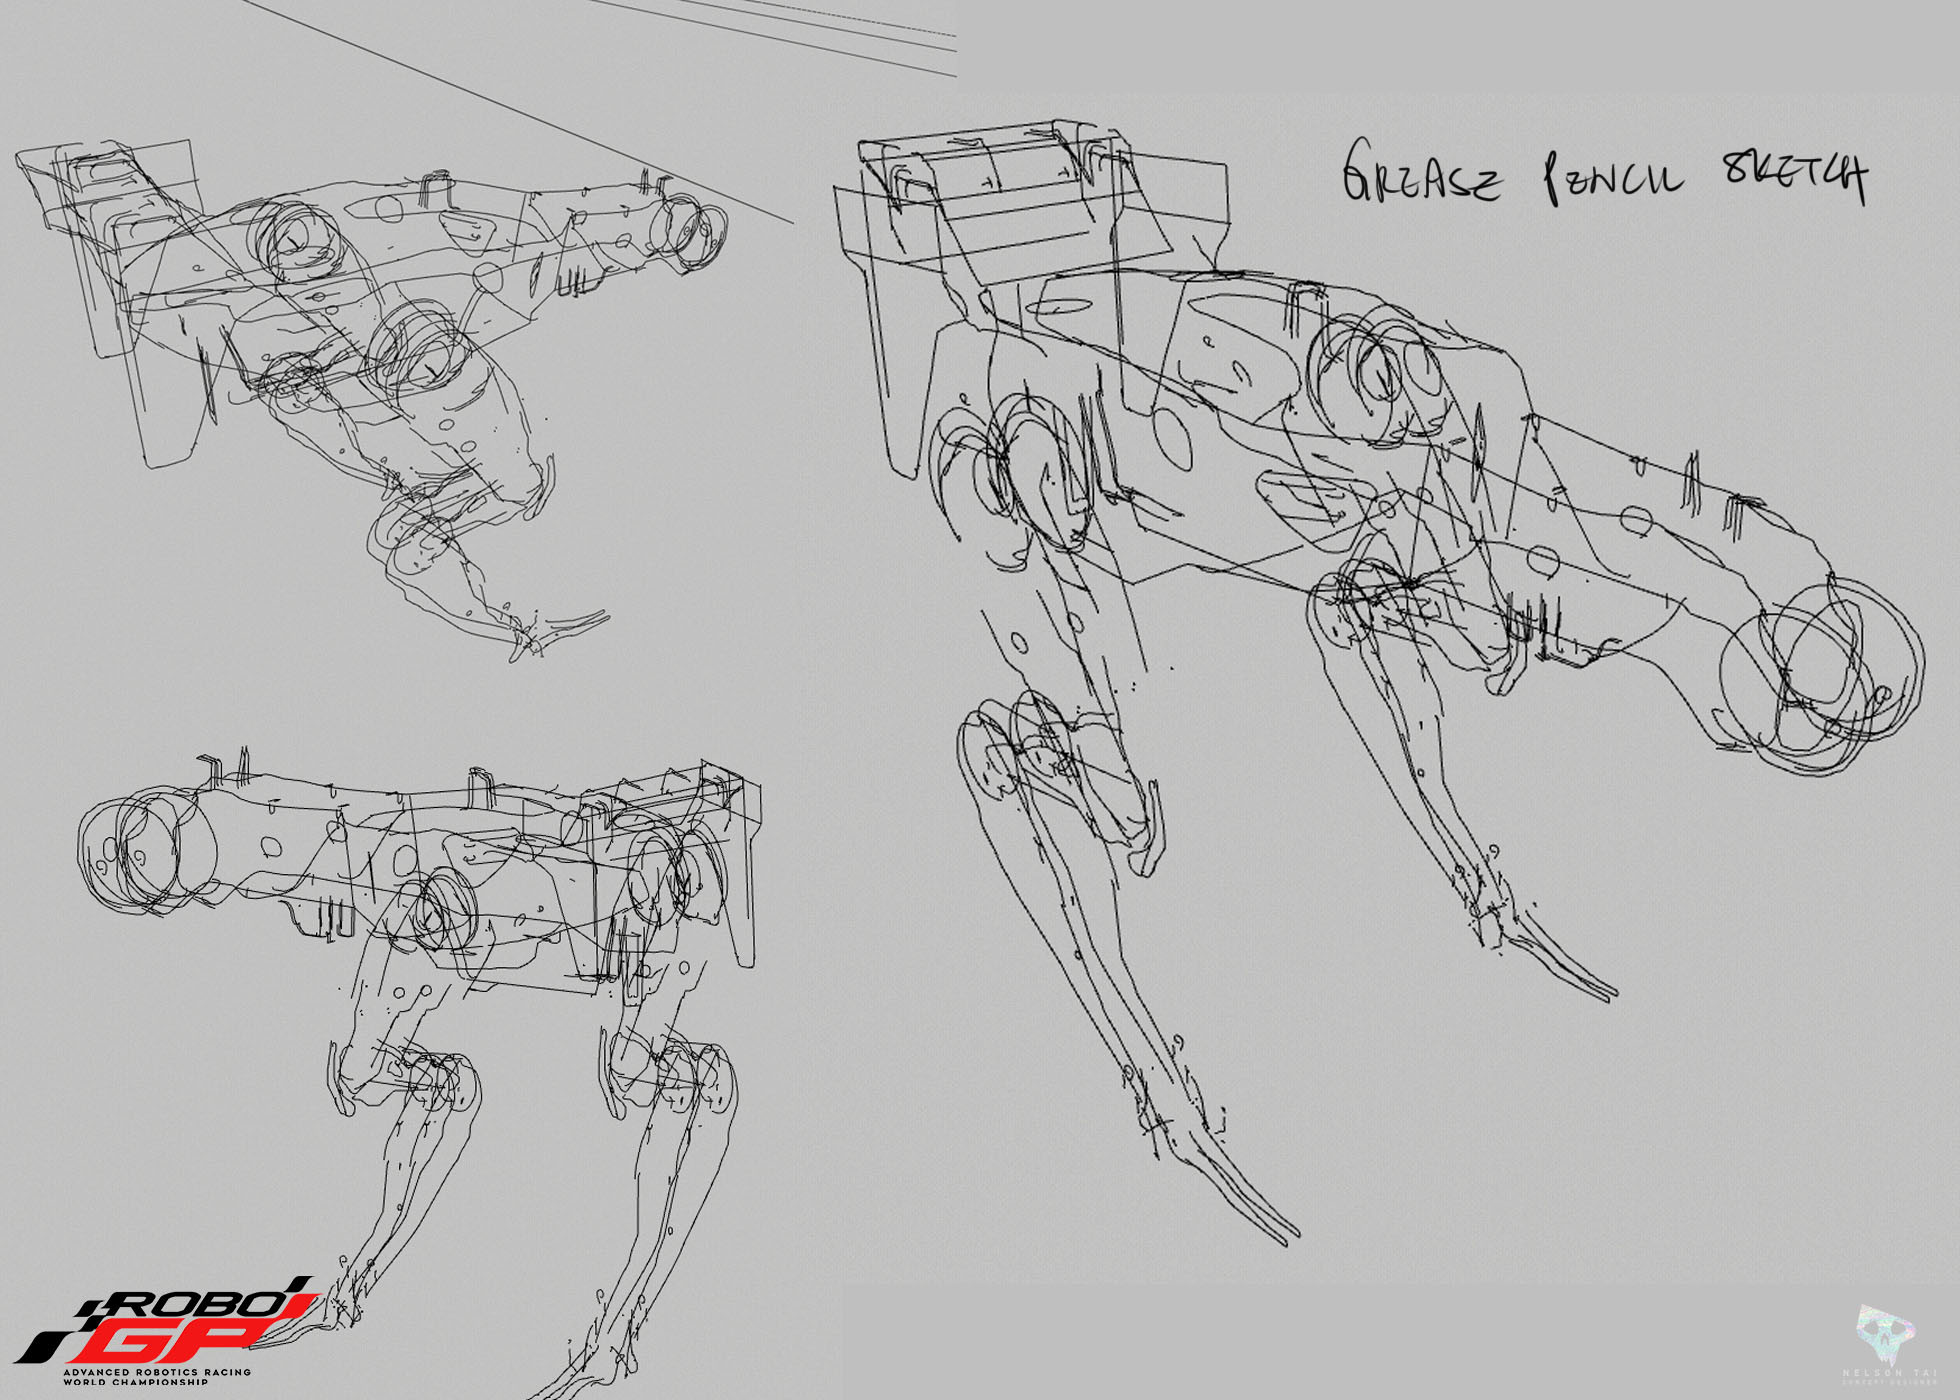 Initial grease pencil sketches to work out the logic and proportions of the design! Super fun!